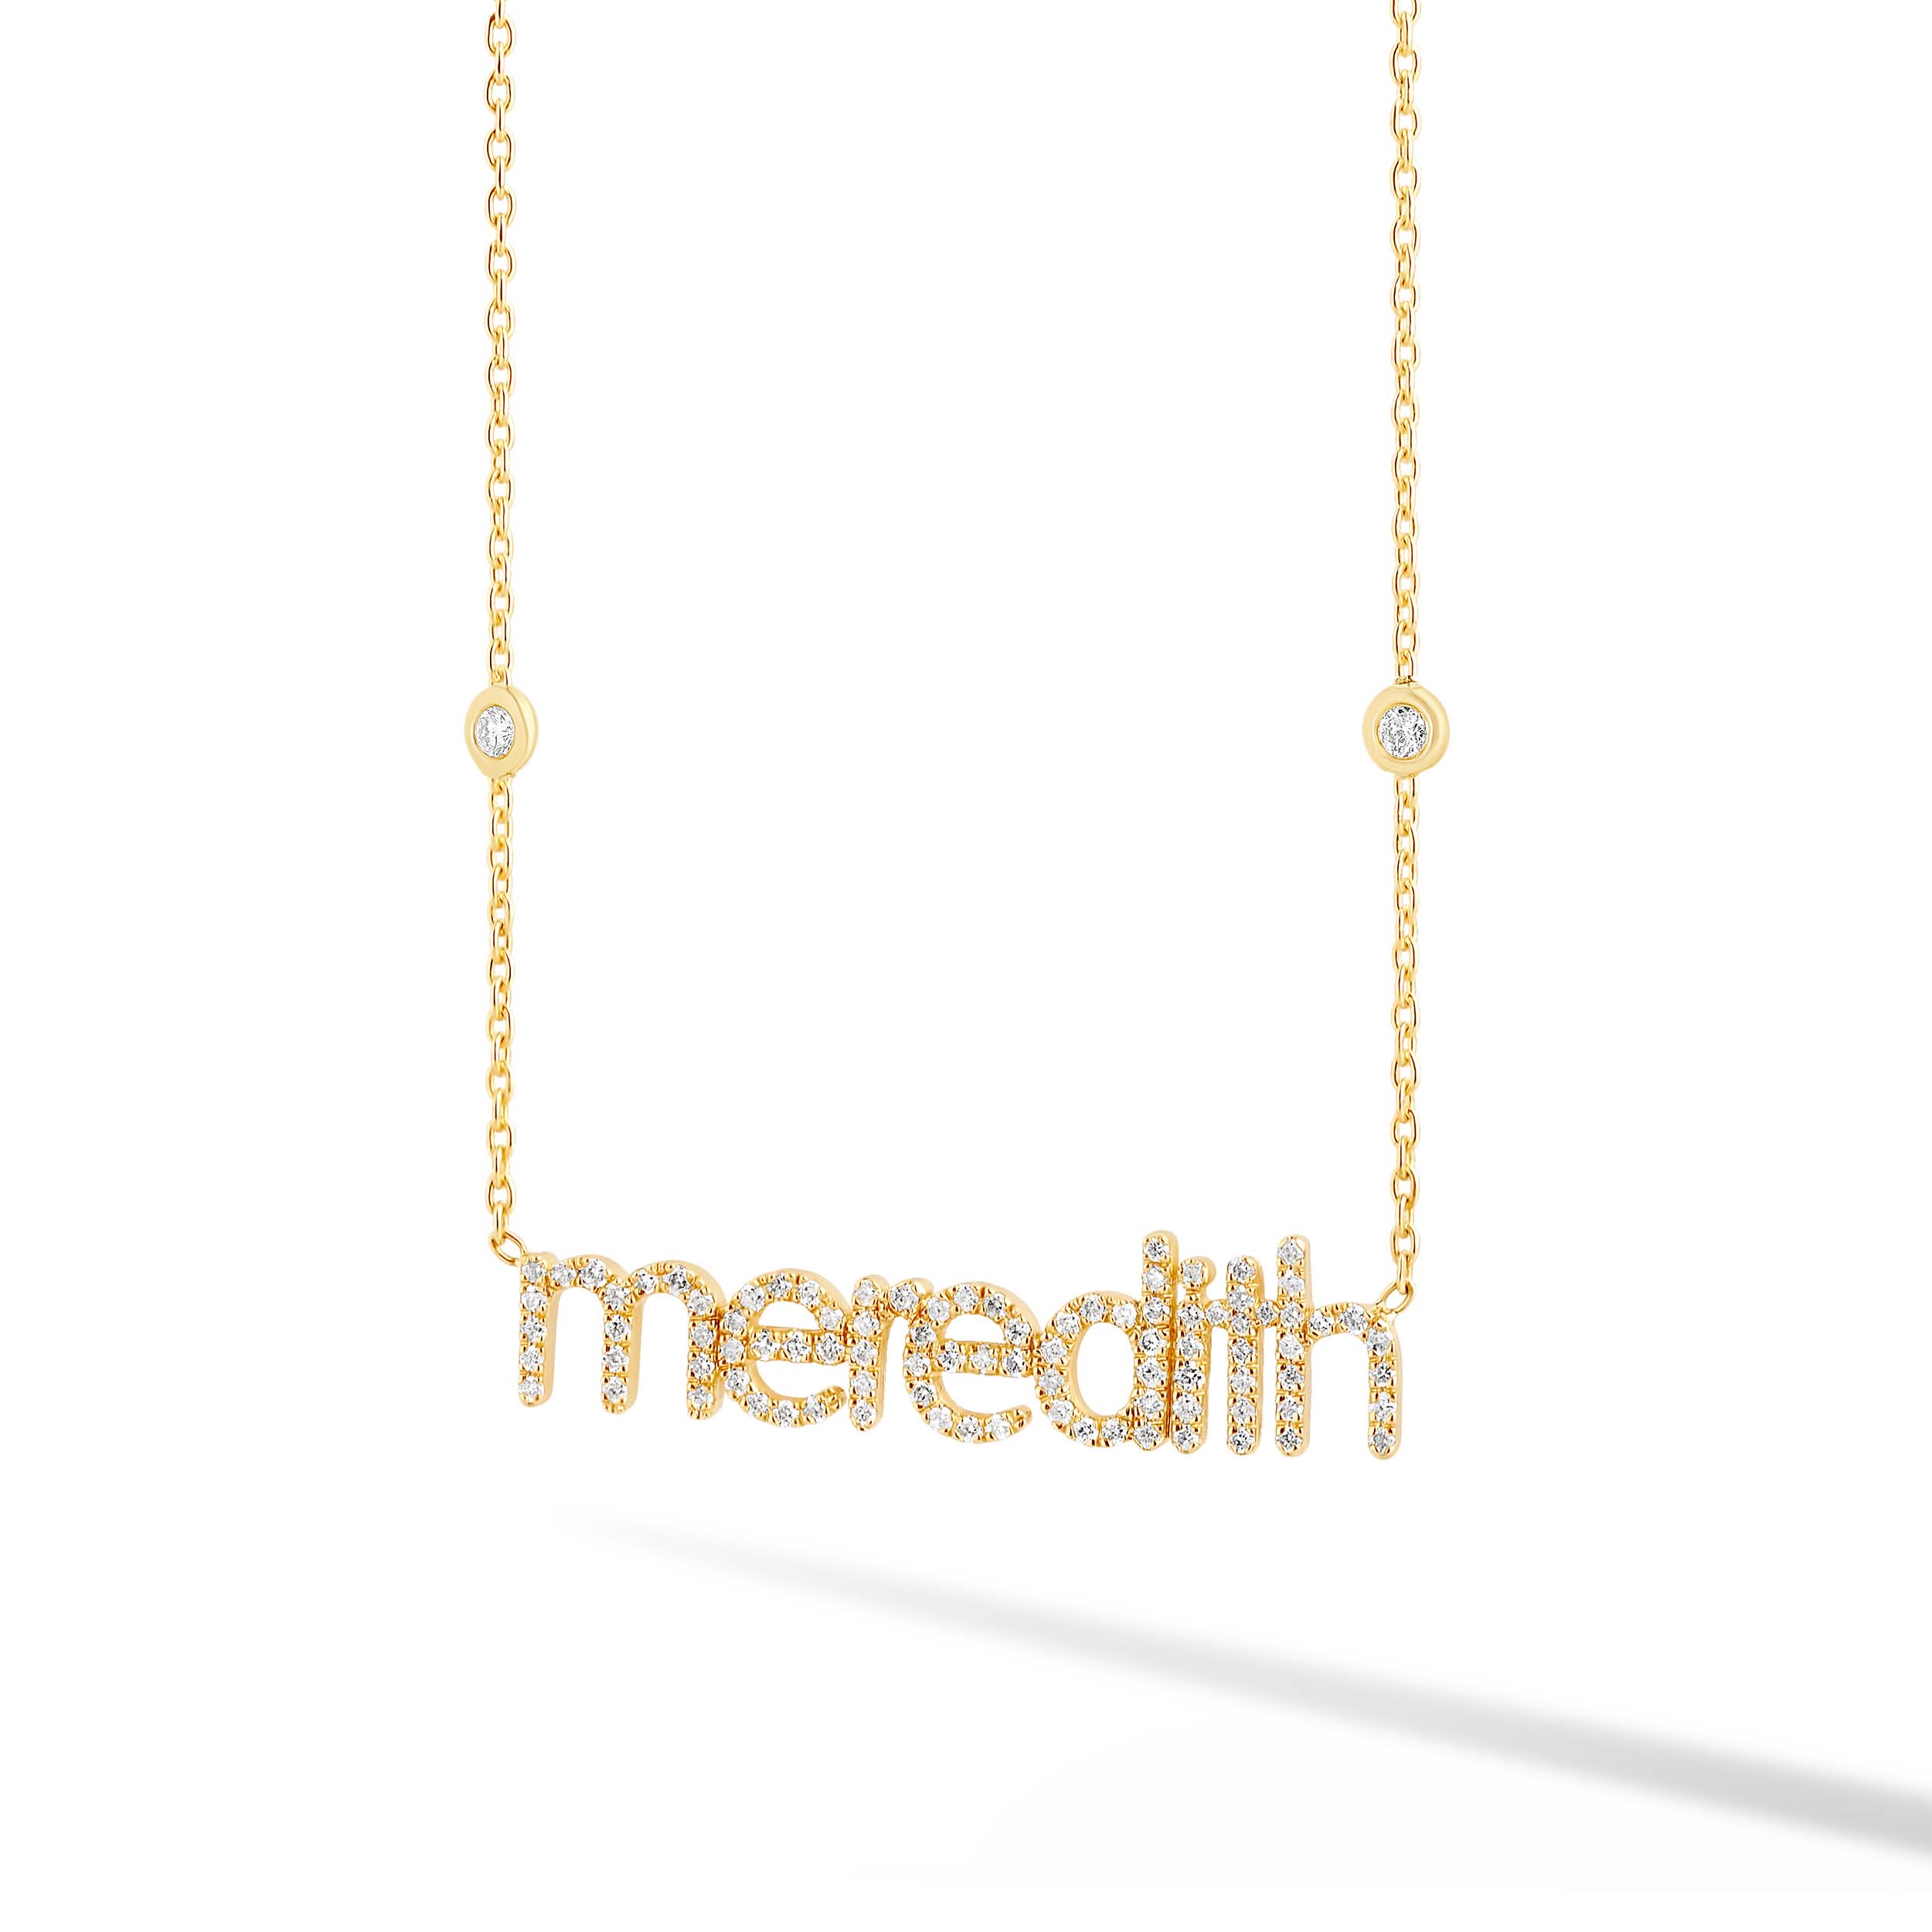 Diamond Name Necklace with Two Bezels